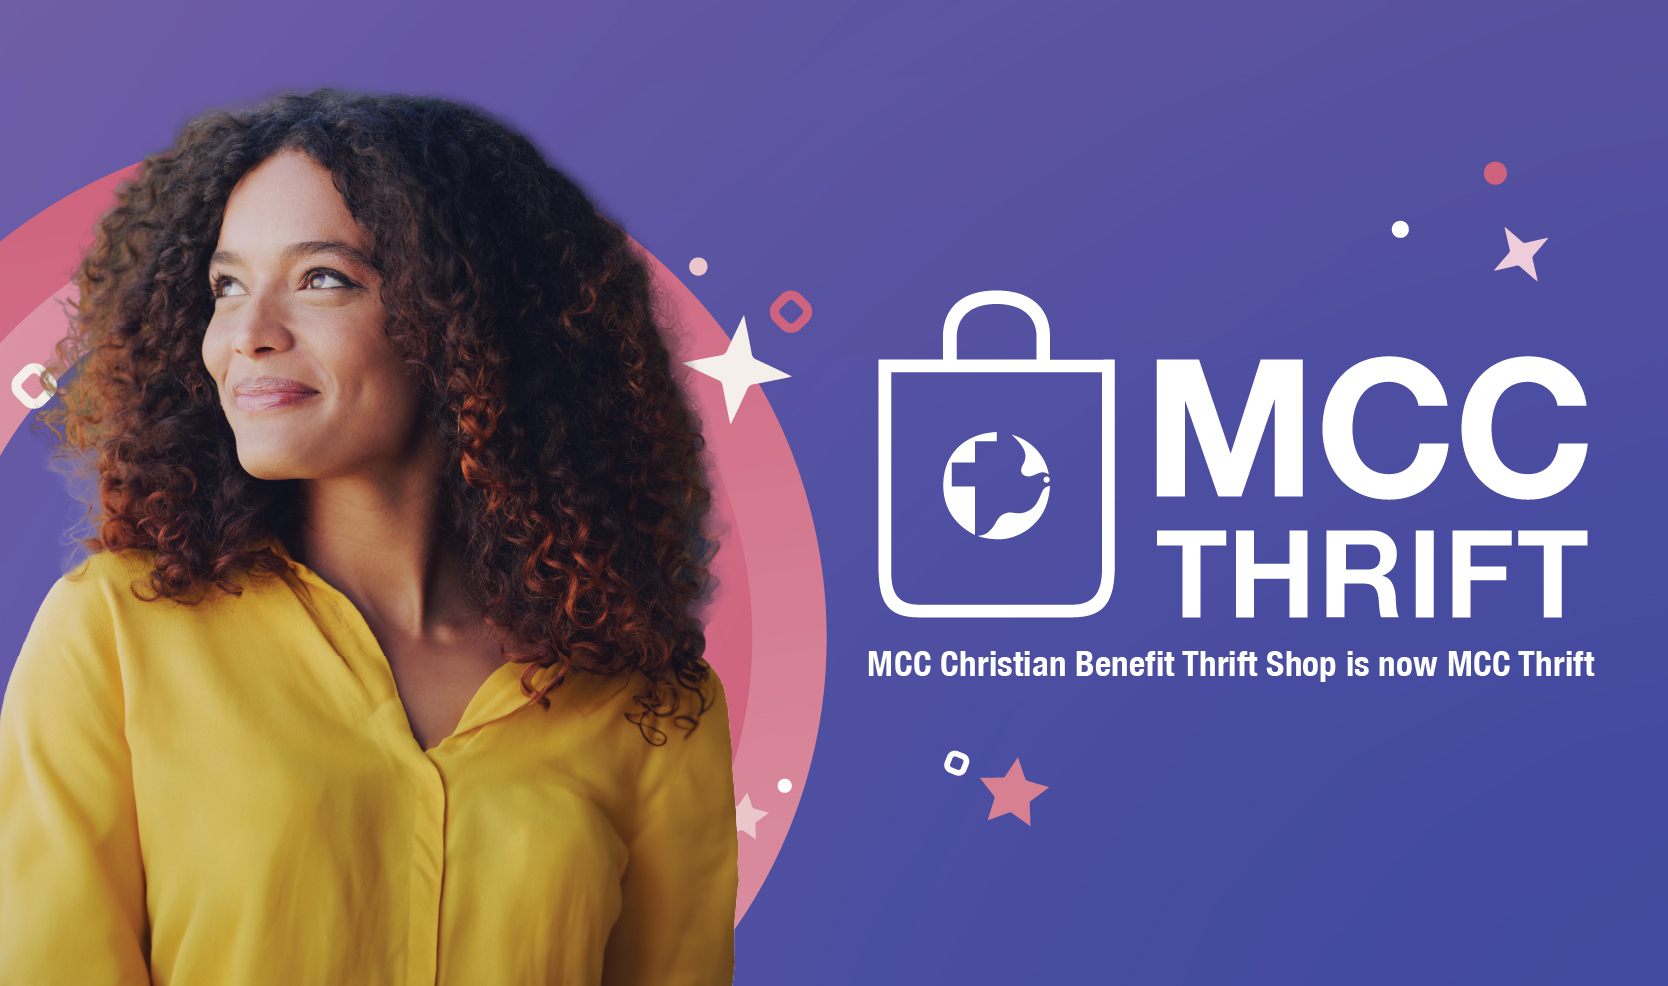 Woman smiling with MCC Thrift logo and text that says MCC Christian Benefit Thrift Shop is now MCC Thrift